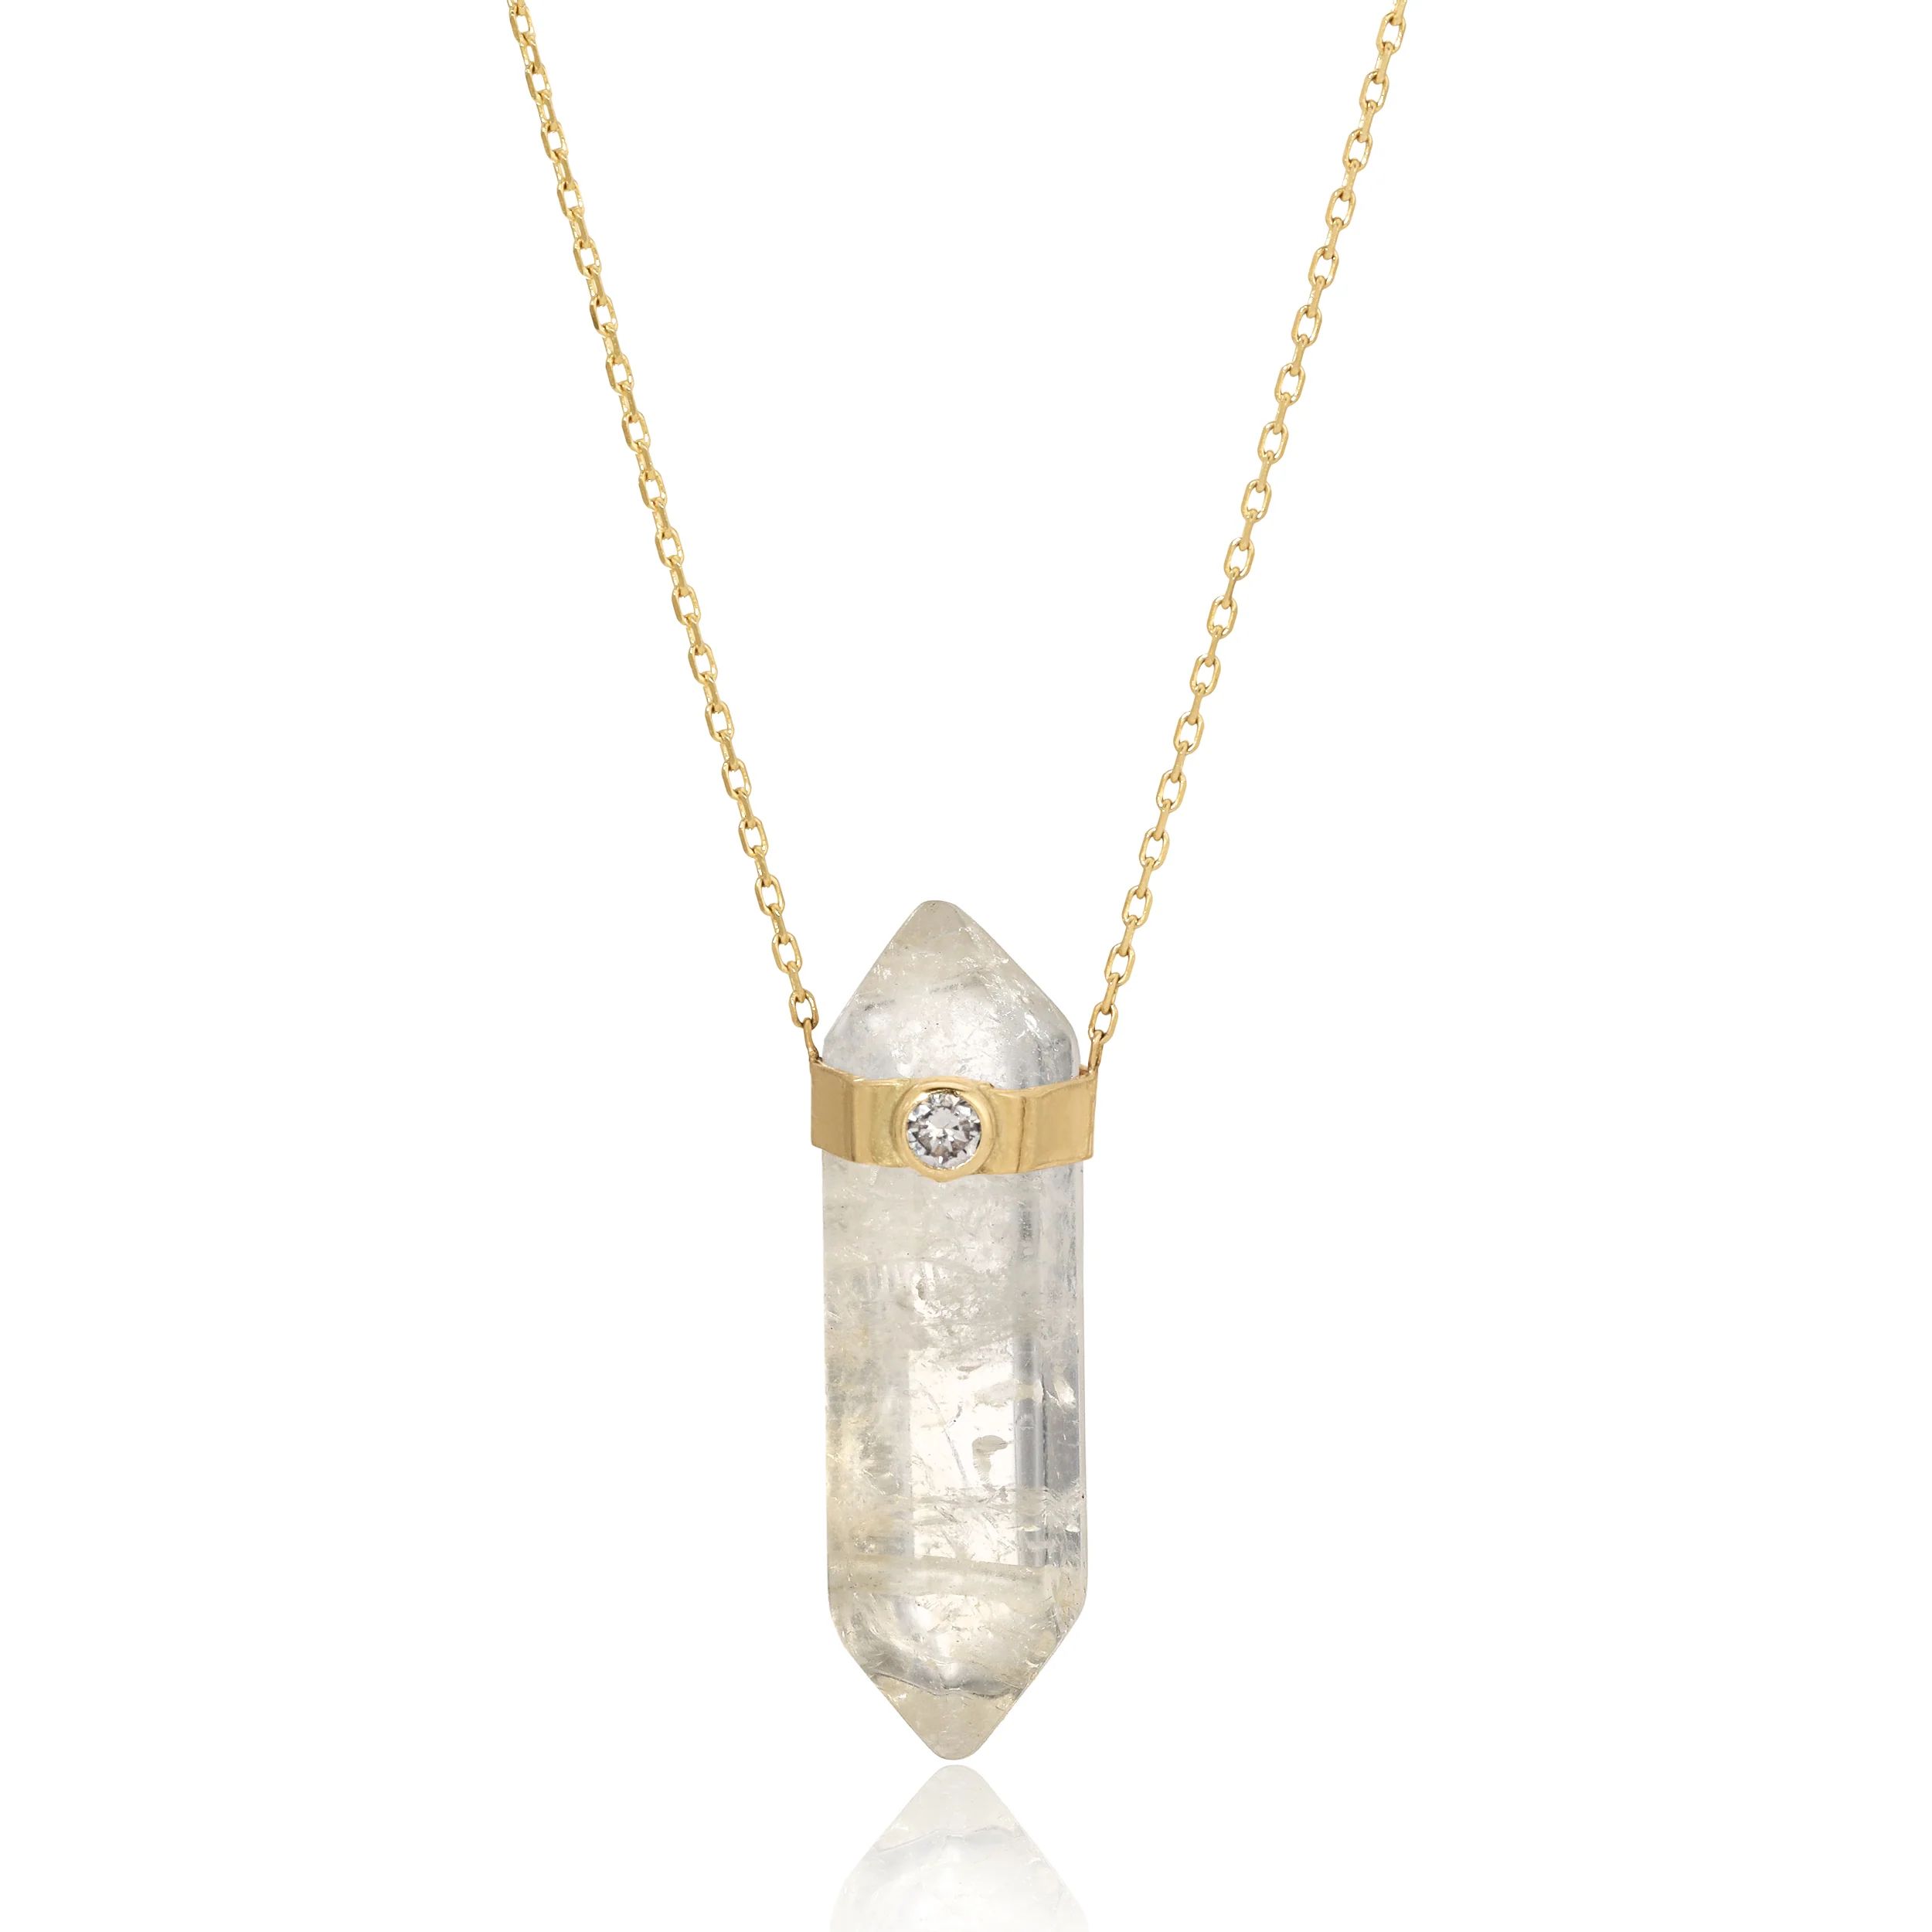 The Clarity Retreat Necklace | Maya Brenner